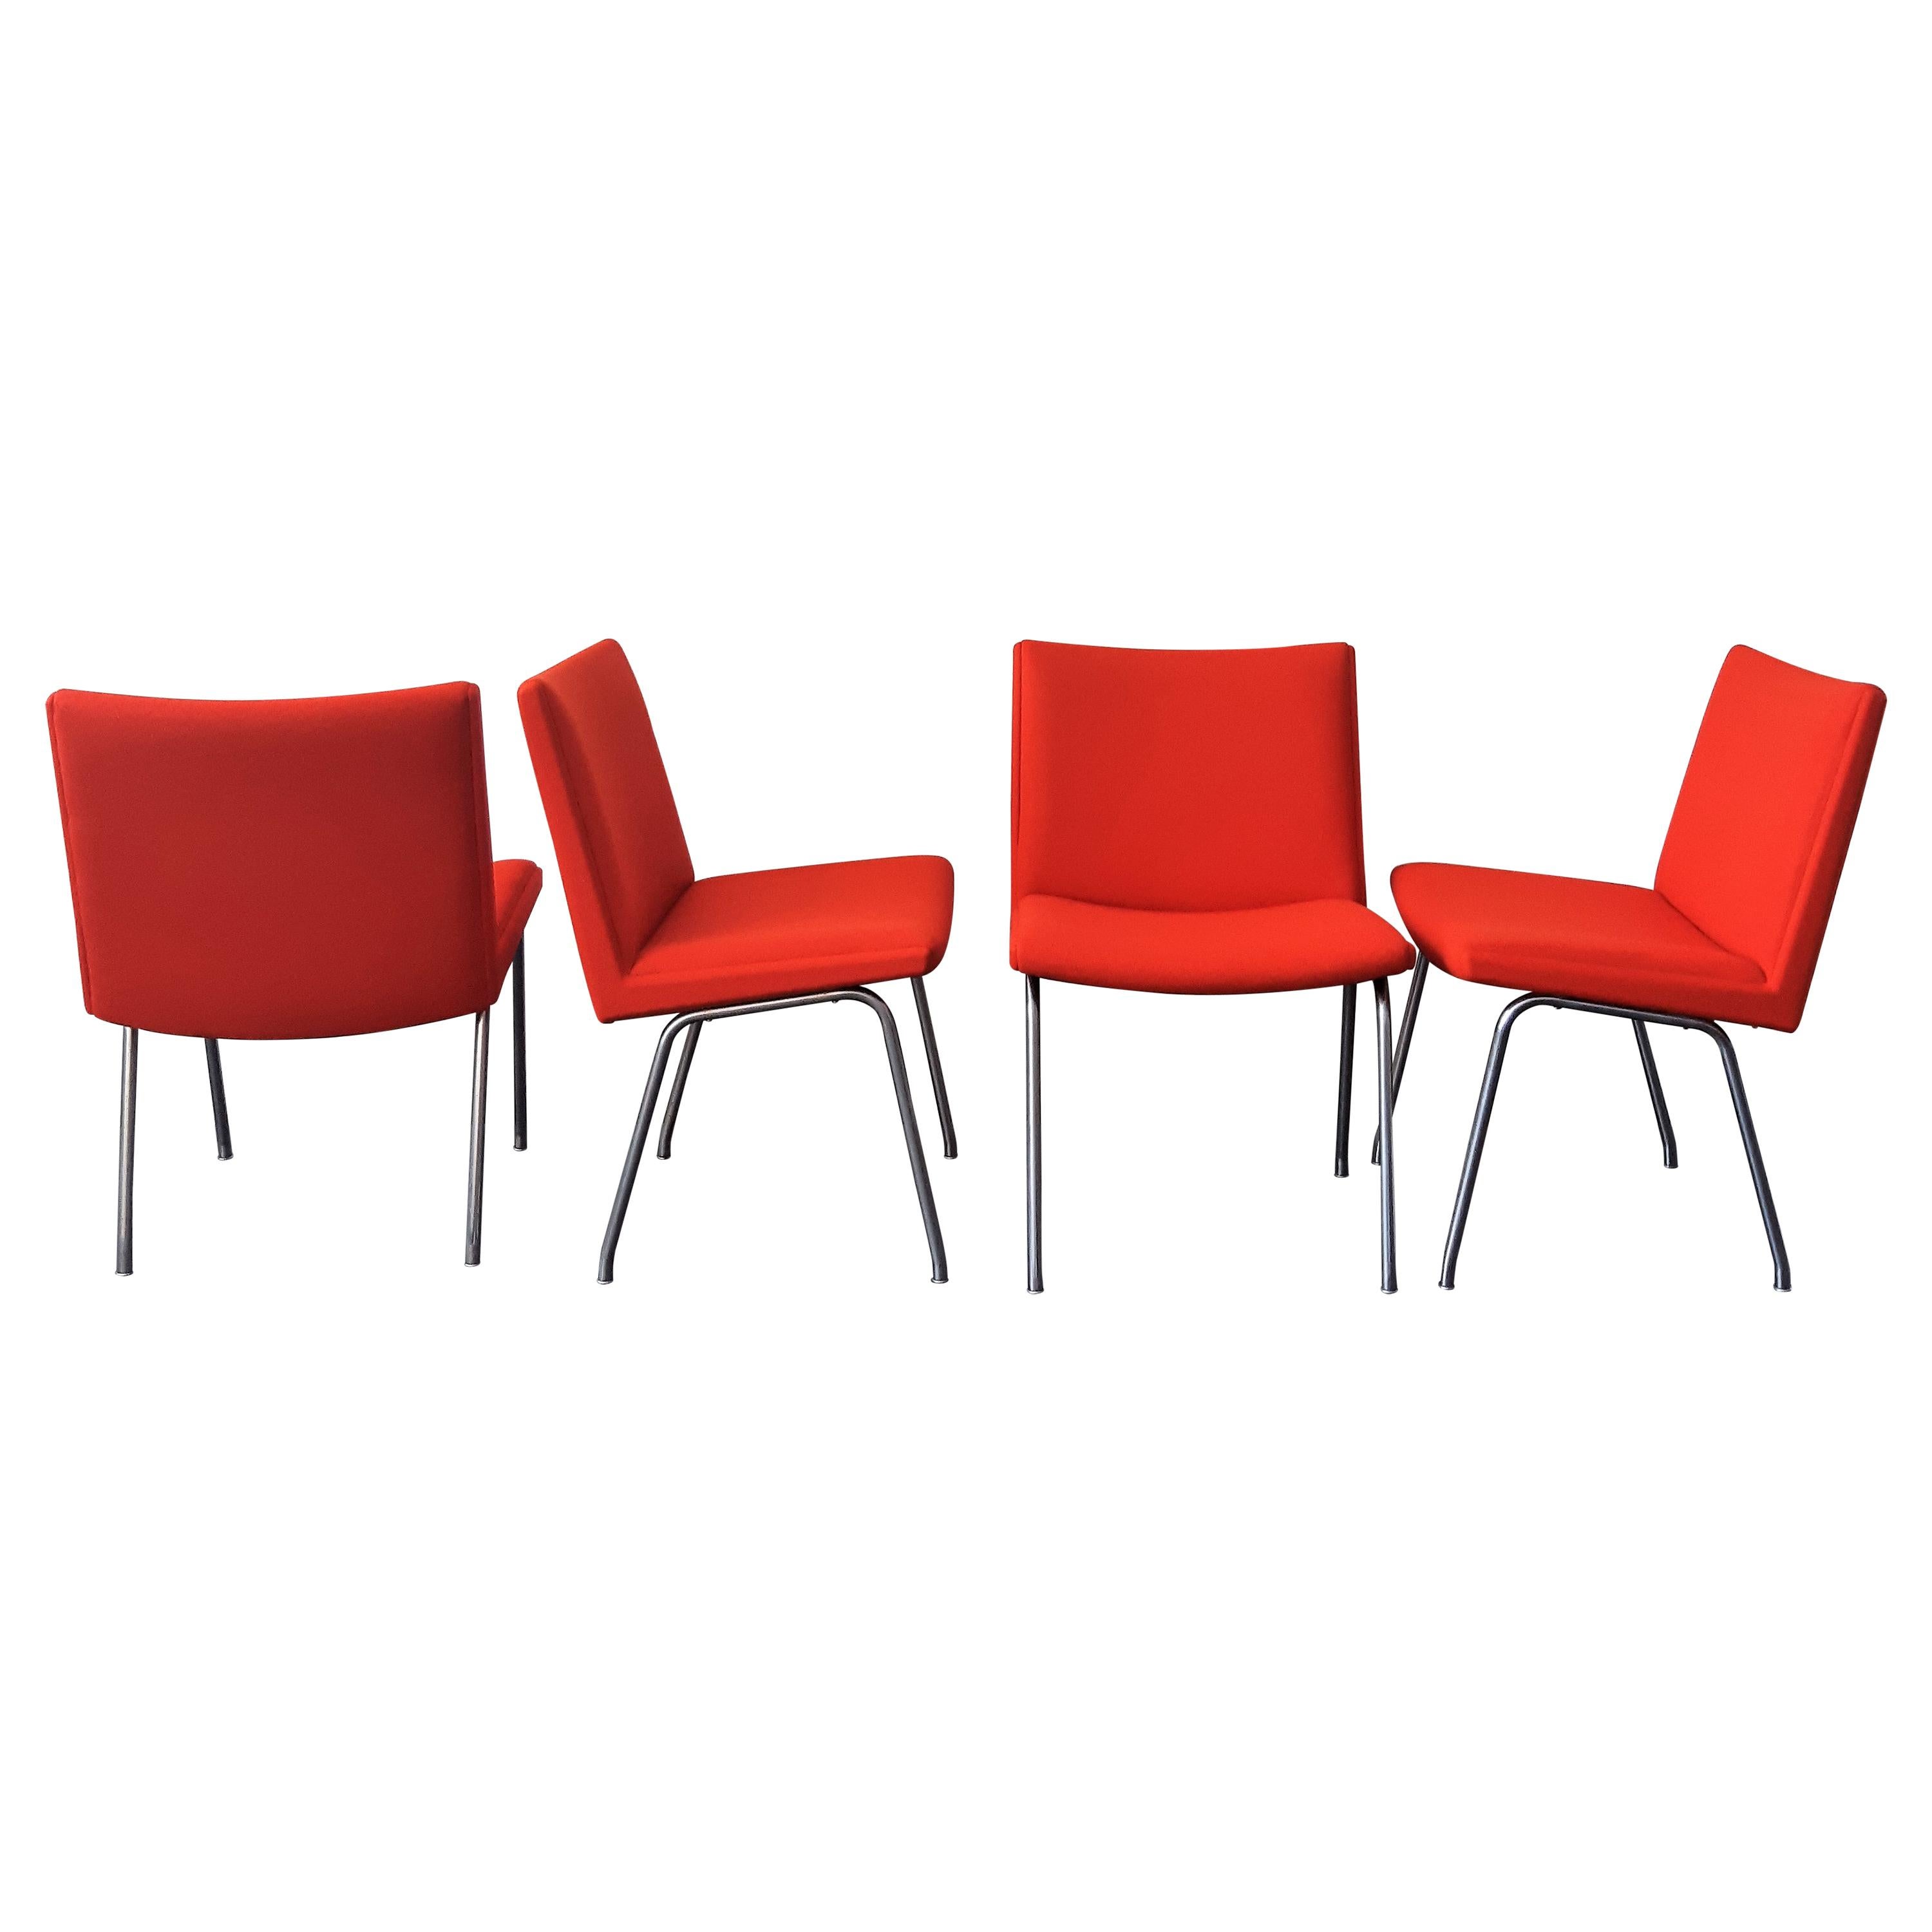 Set of 4 Model Airport Dining Chairs by Hans Wegner for AP Stolen, Denmark For Sale